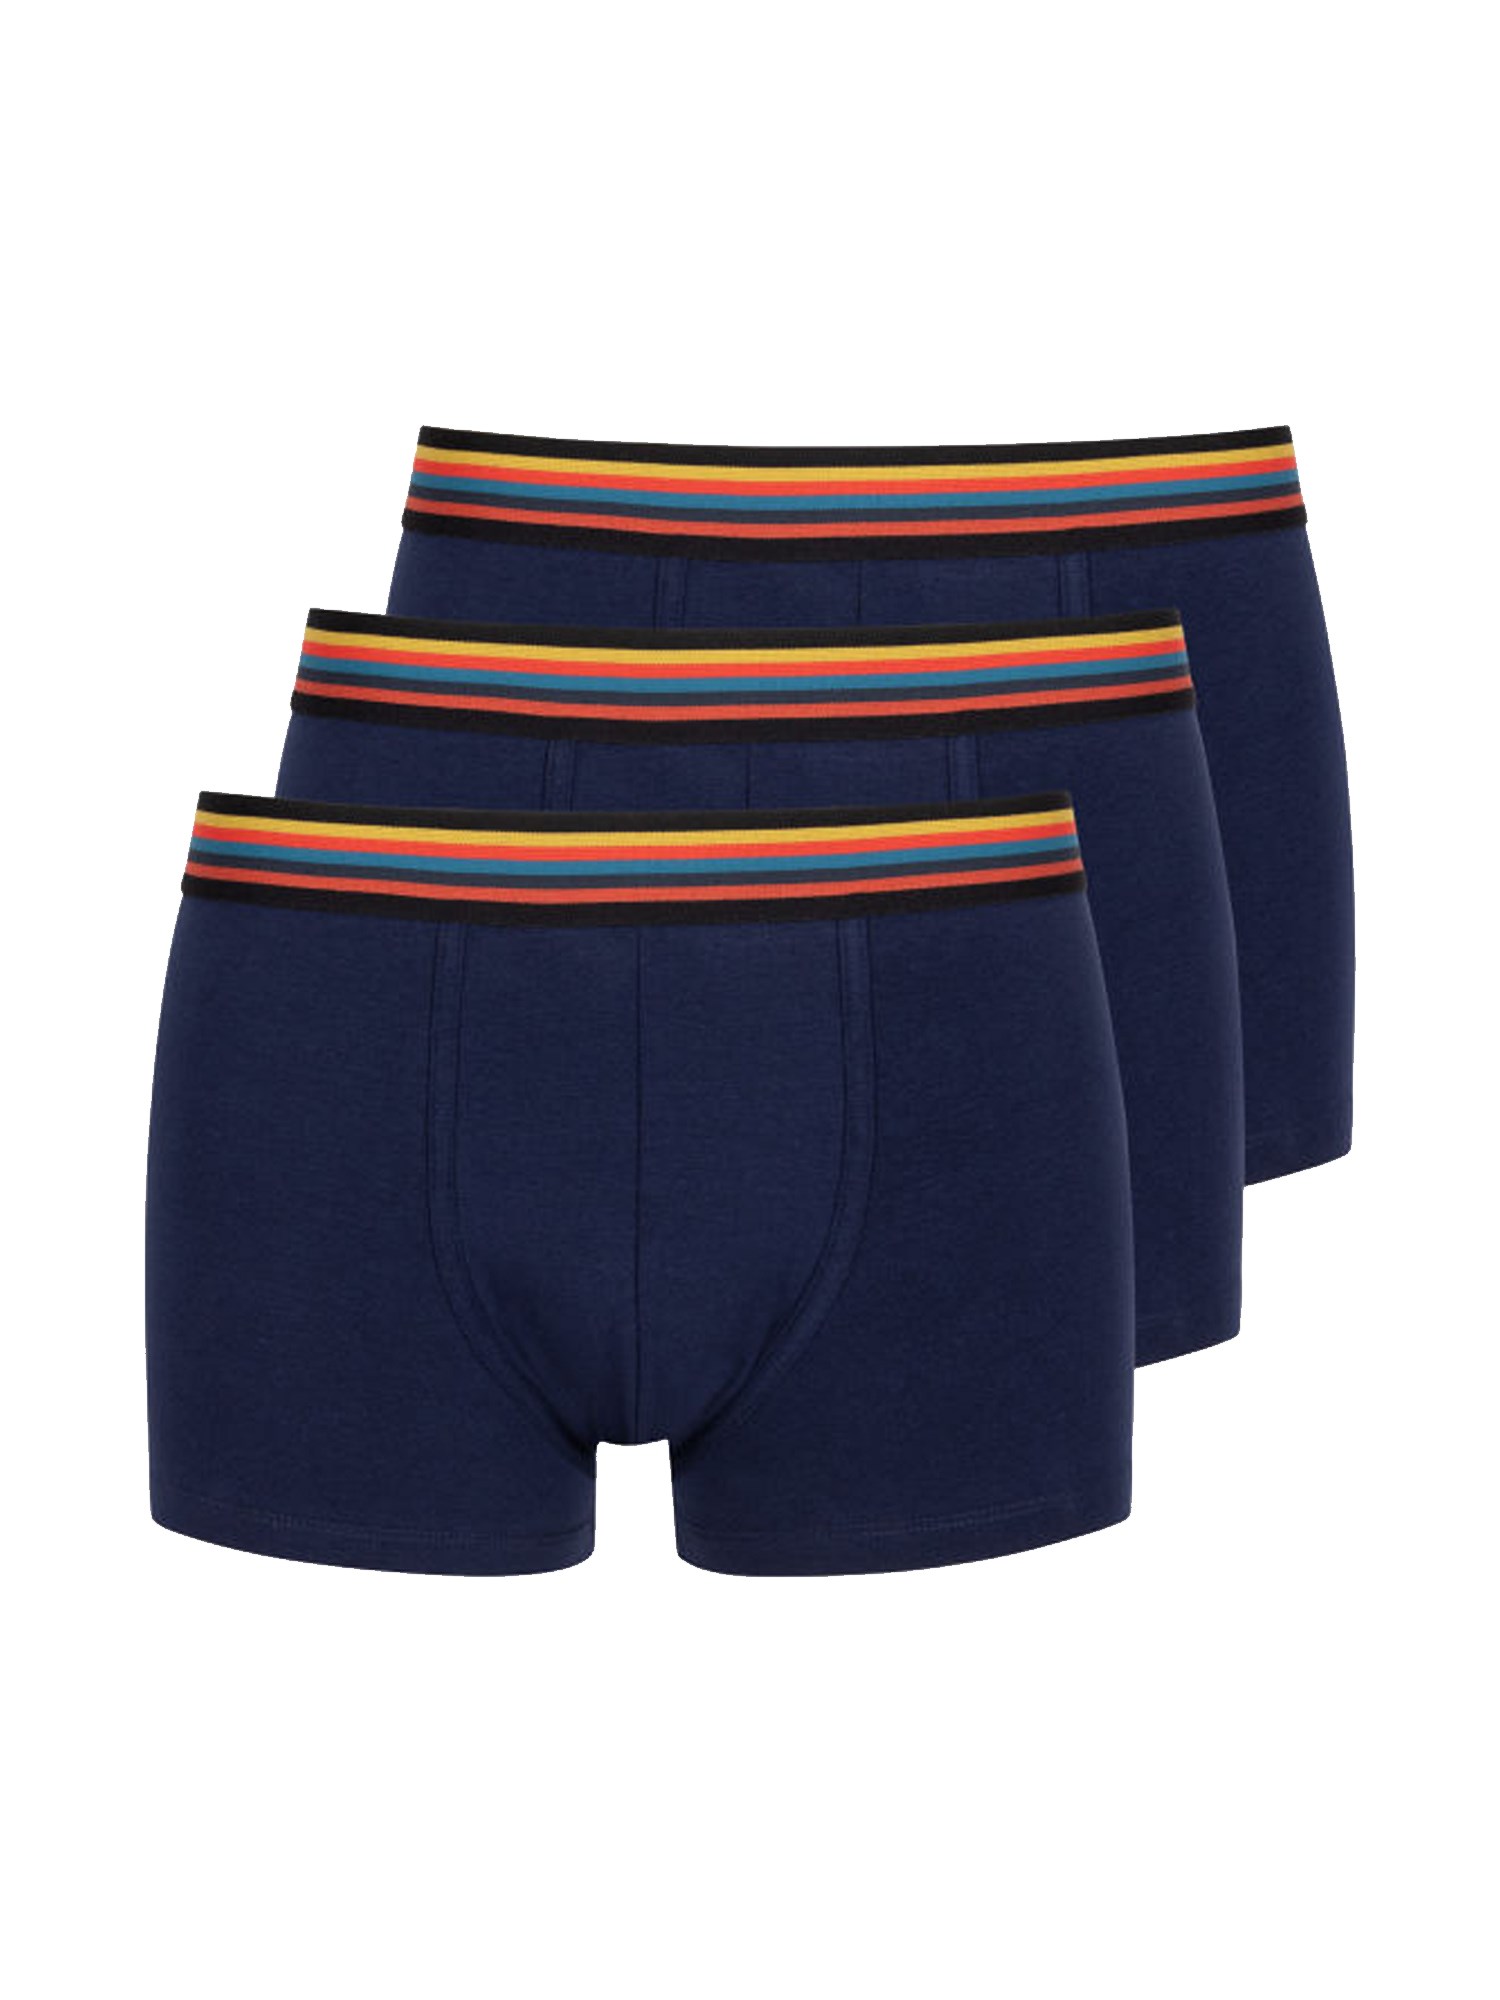 paul smith pack with three boxer shorts